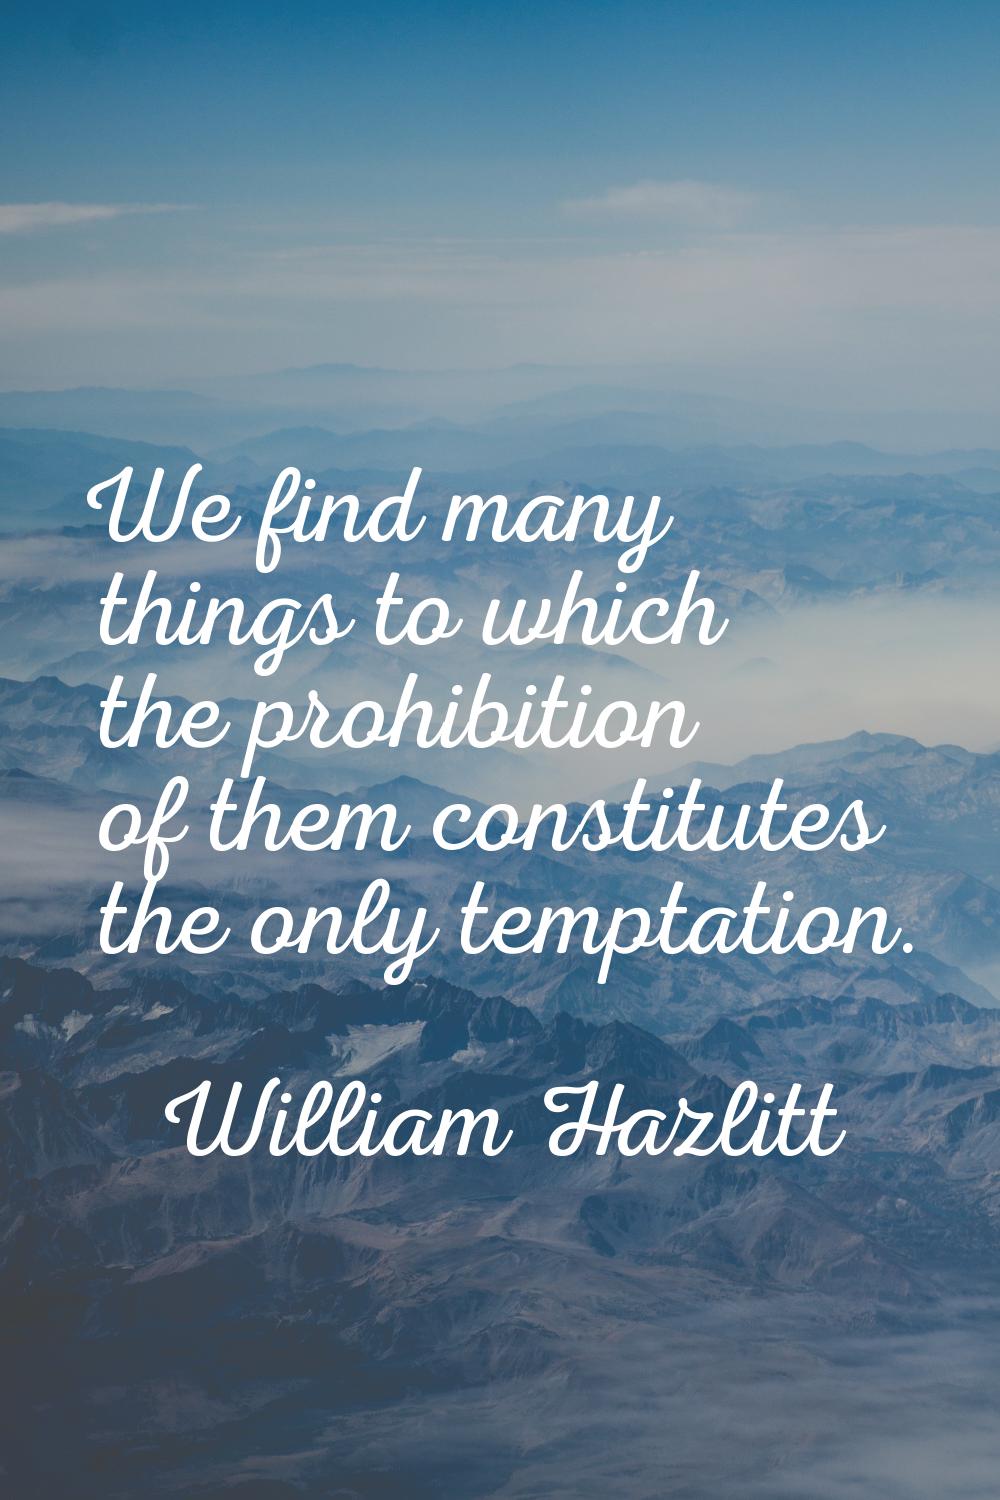 We find many things to which the prohibition of them constitutes the only temptation.